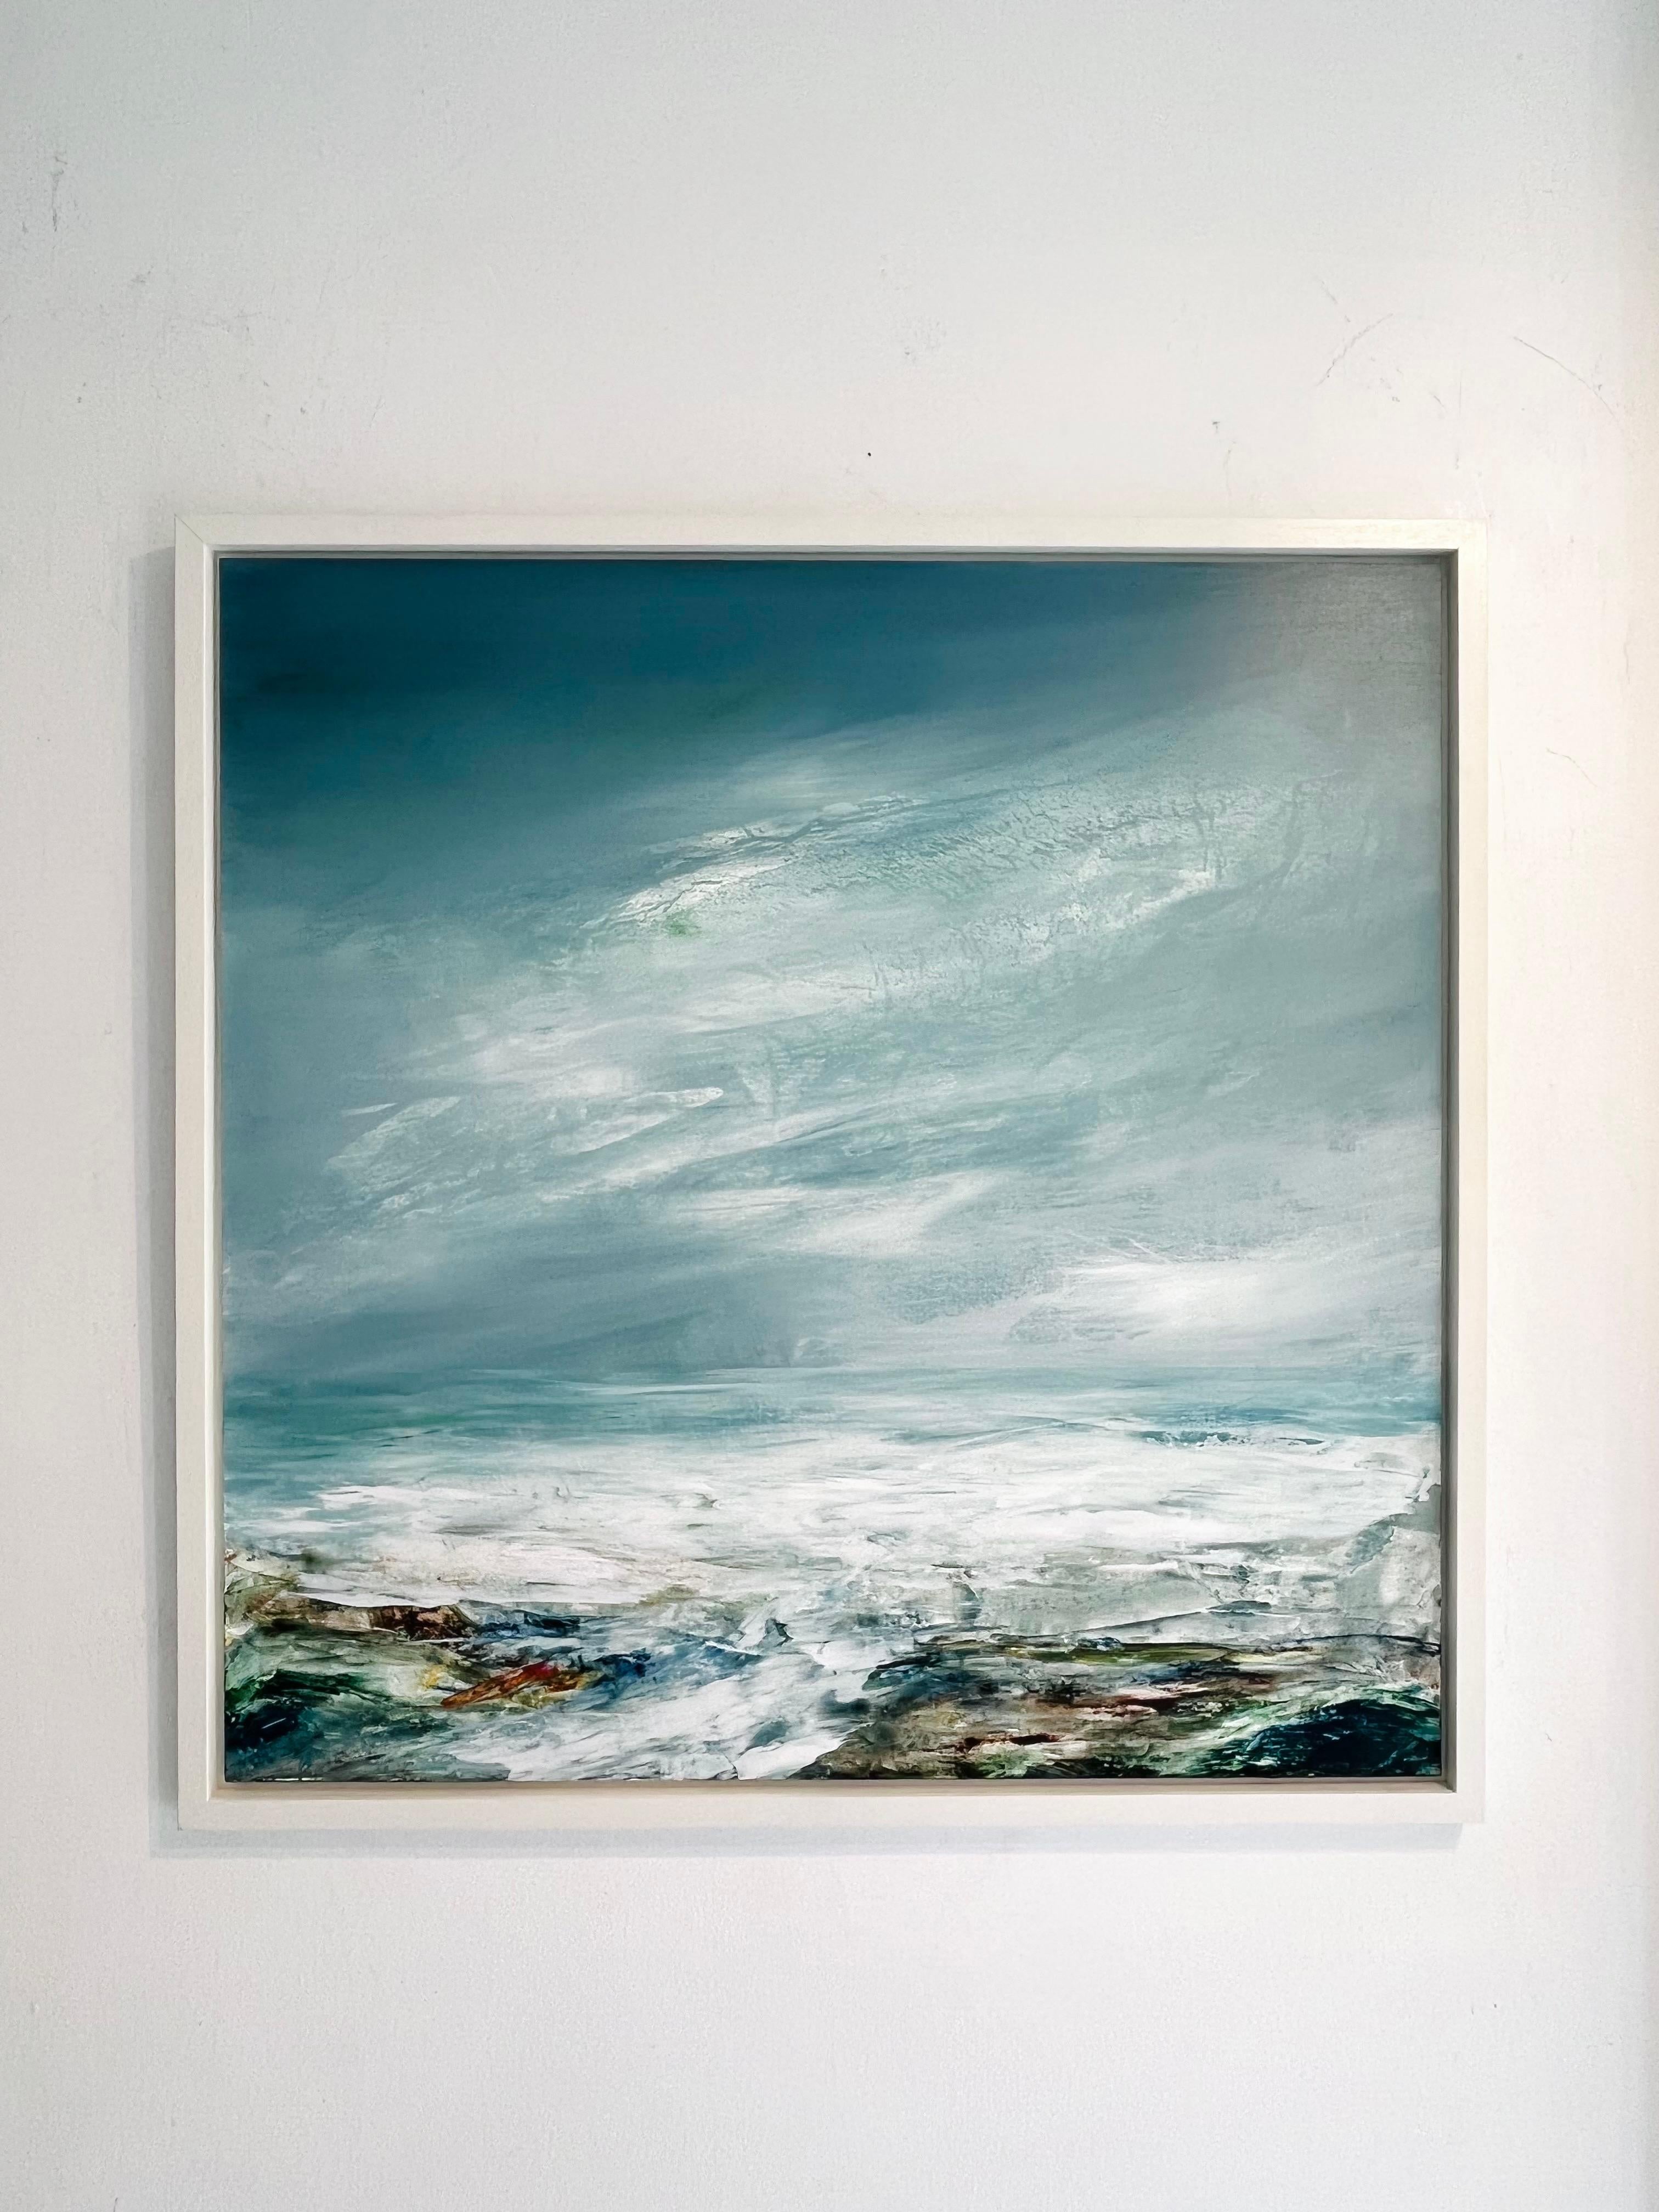 Untamed Ocean-original abstract seascape-ocean painting sale-contemporary Art - Painting by Leila Godden UA